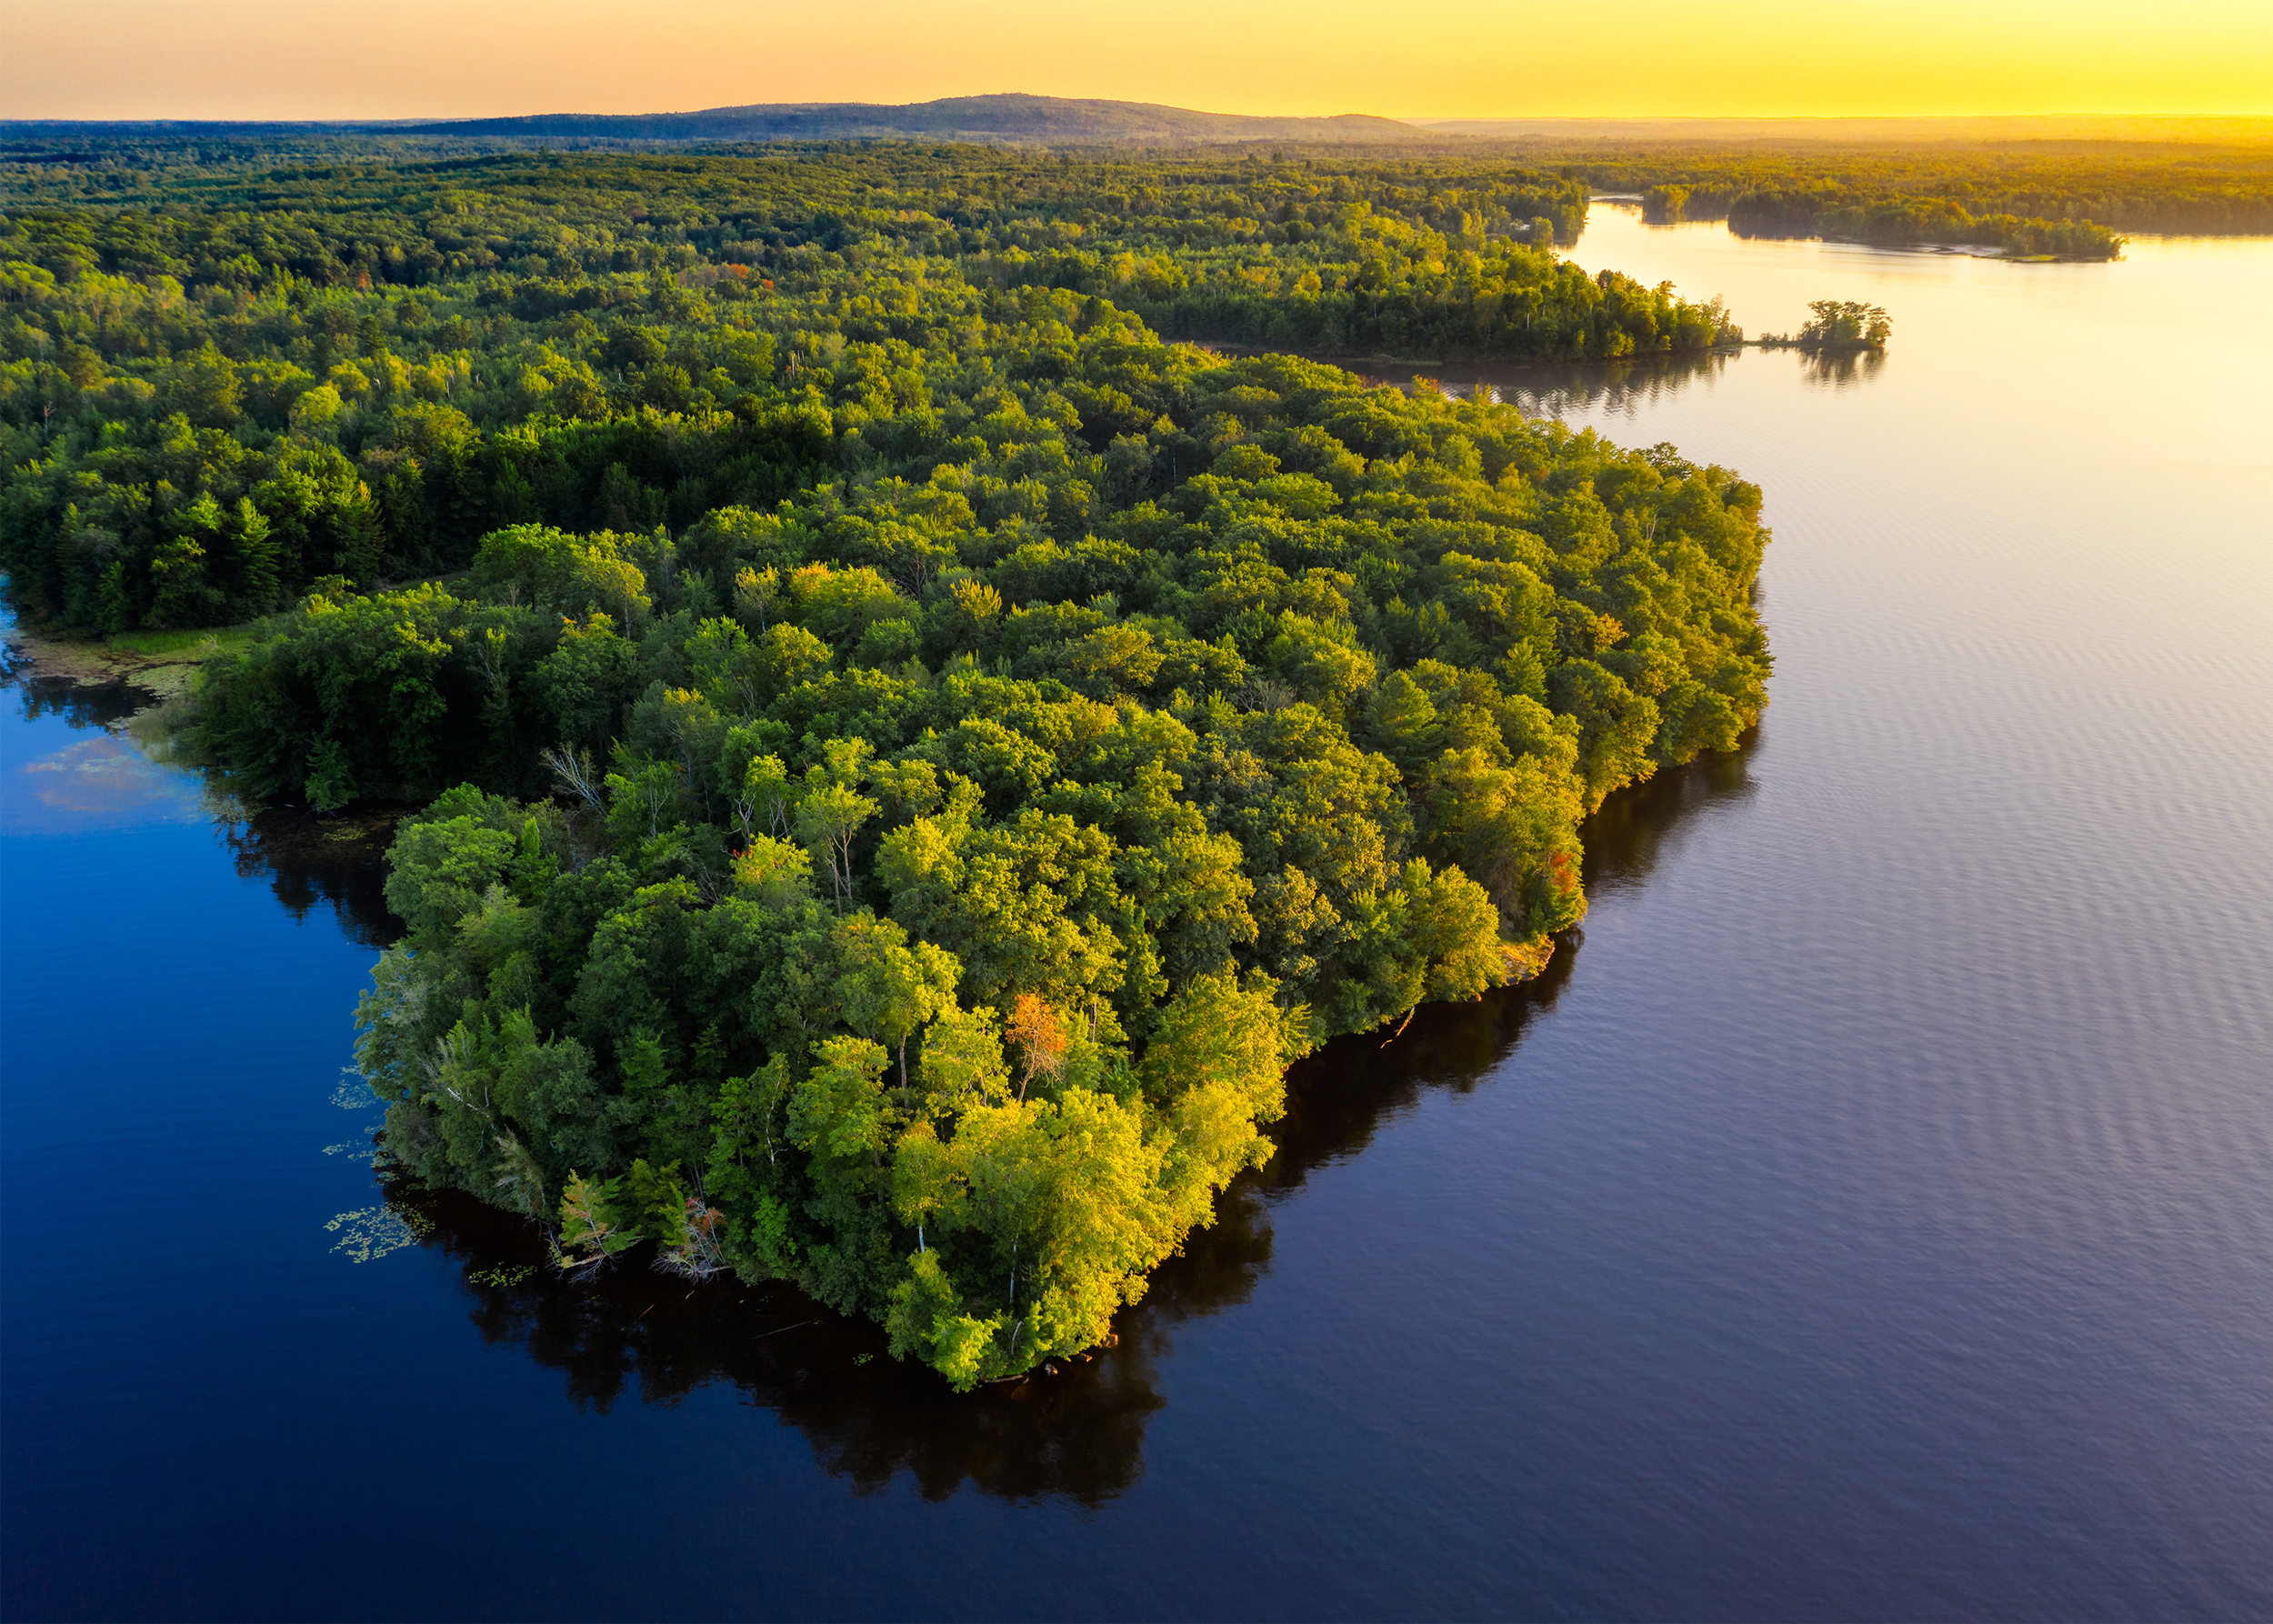 An overhead view of a trees and a body of water in Wisconsin.